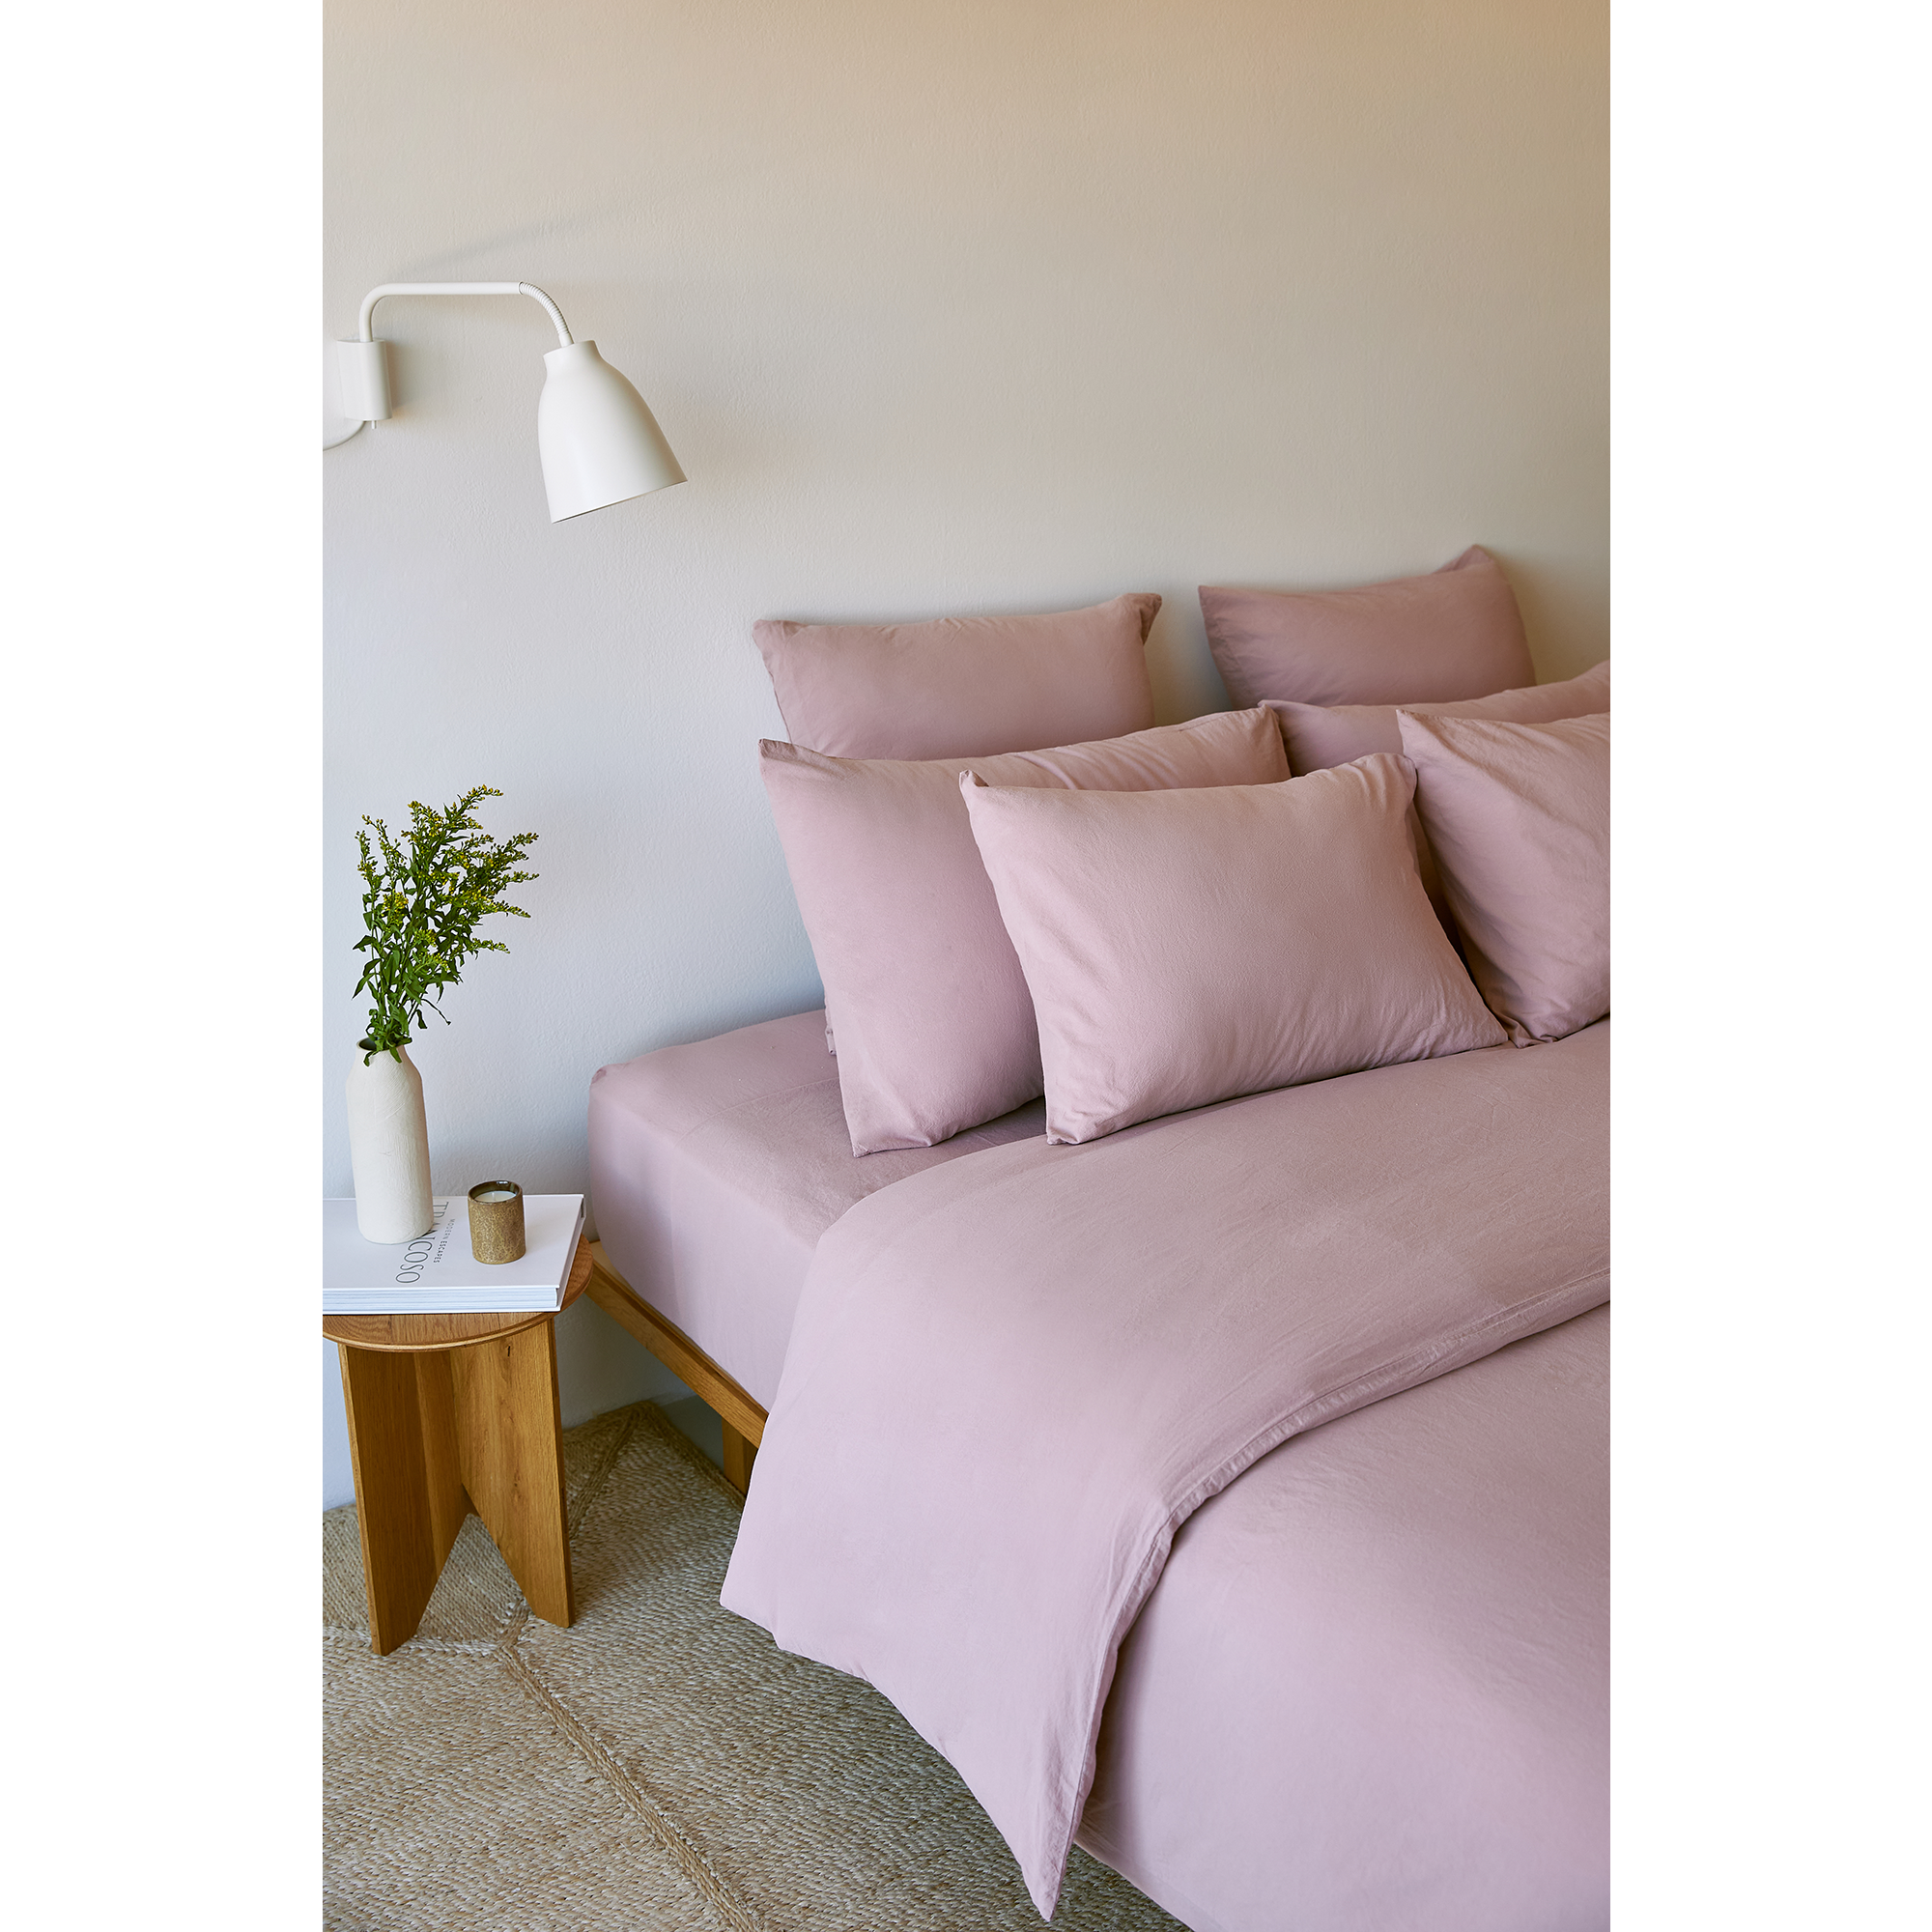 Torres Novas 1845 Duvet cover Old Pink - Hotel size - 260 x 240 cm (without pillowcases) - Washed Cotton